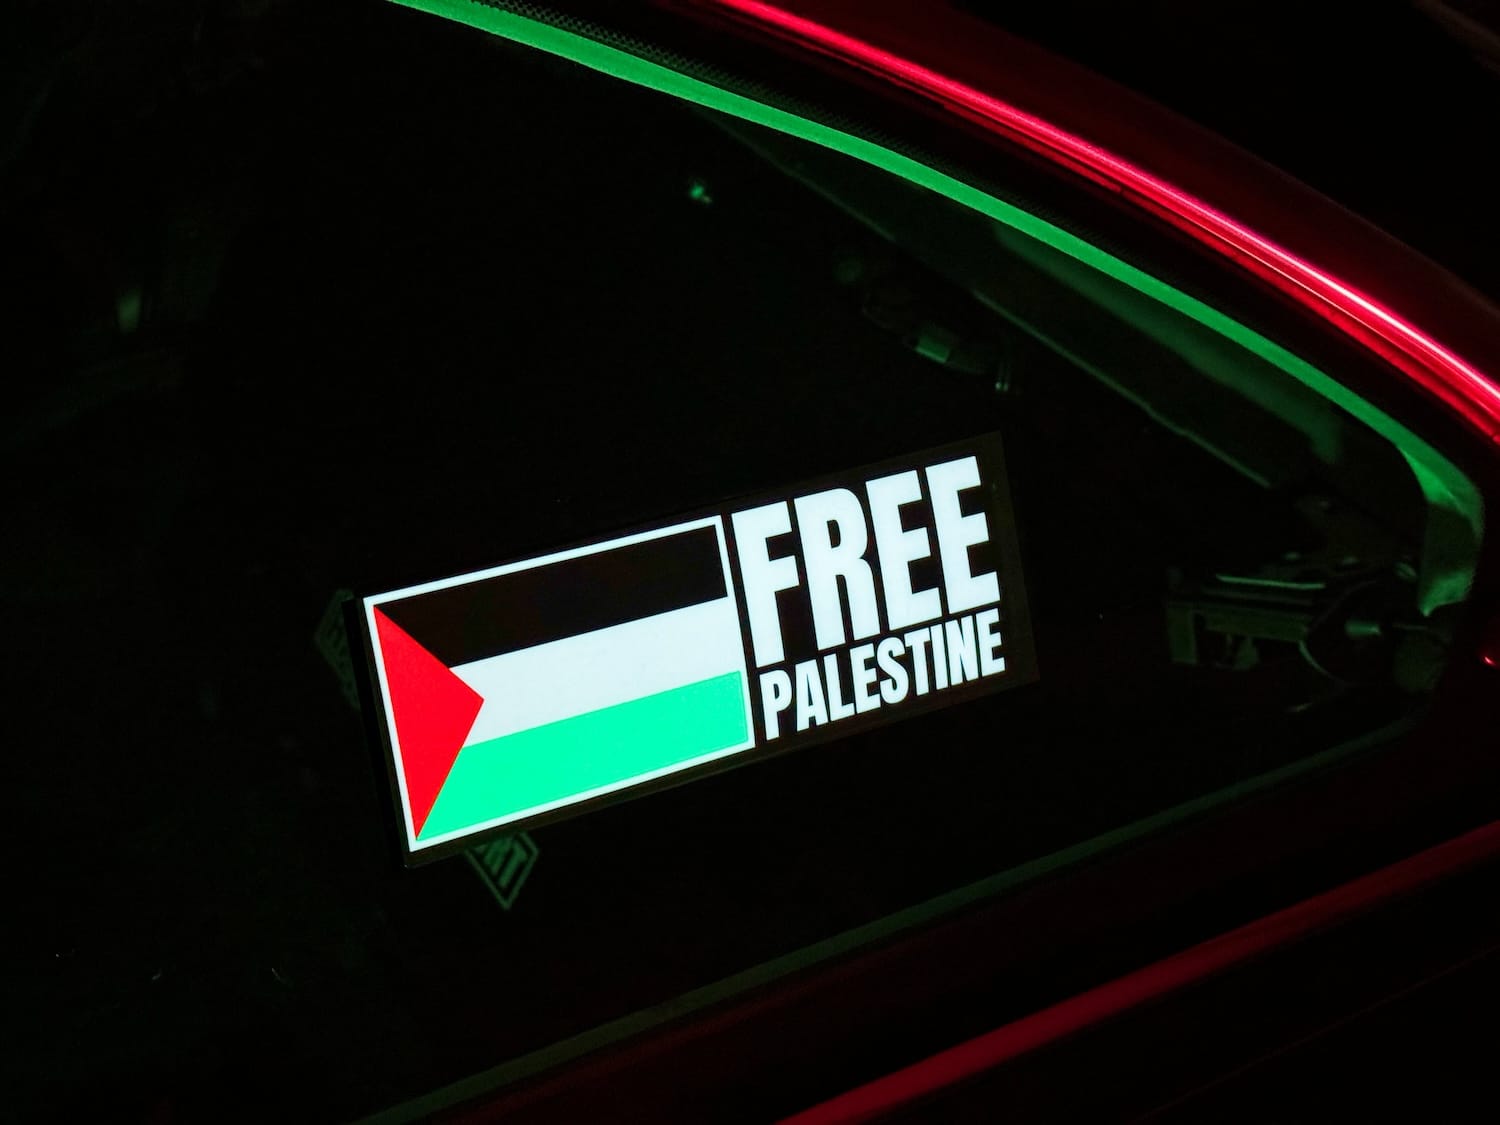 Free Palestine - v3.0 Remote Control USB Rechargeable - Illuminated Adhesive Decal